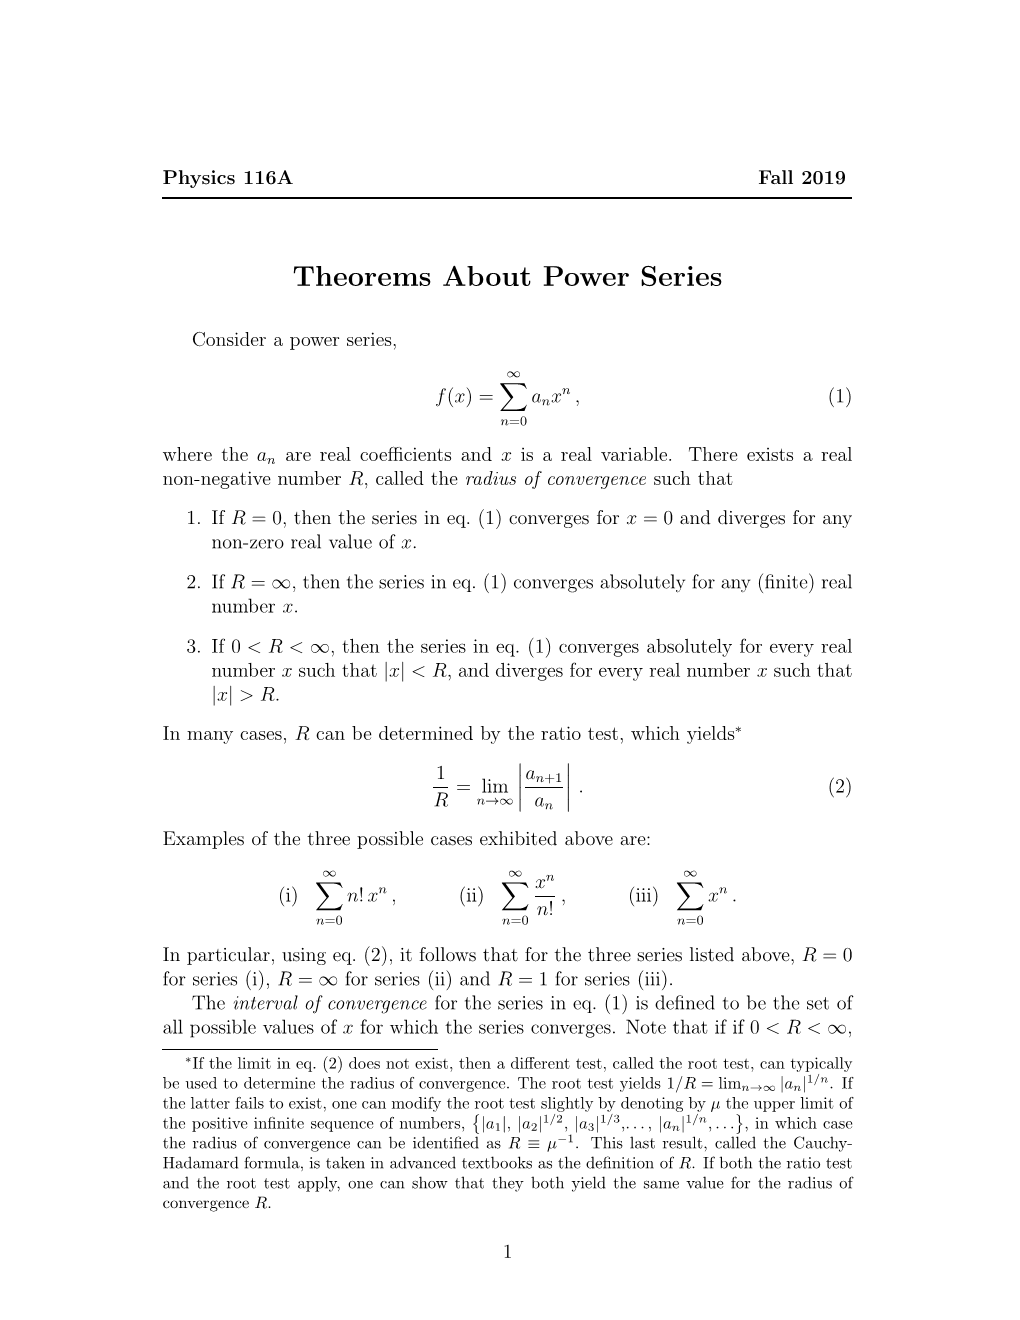 Theorems About Power Series